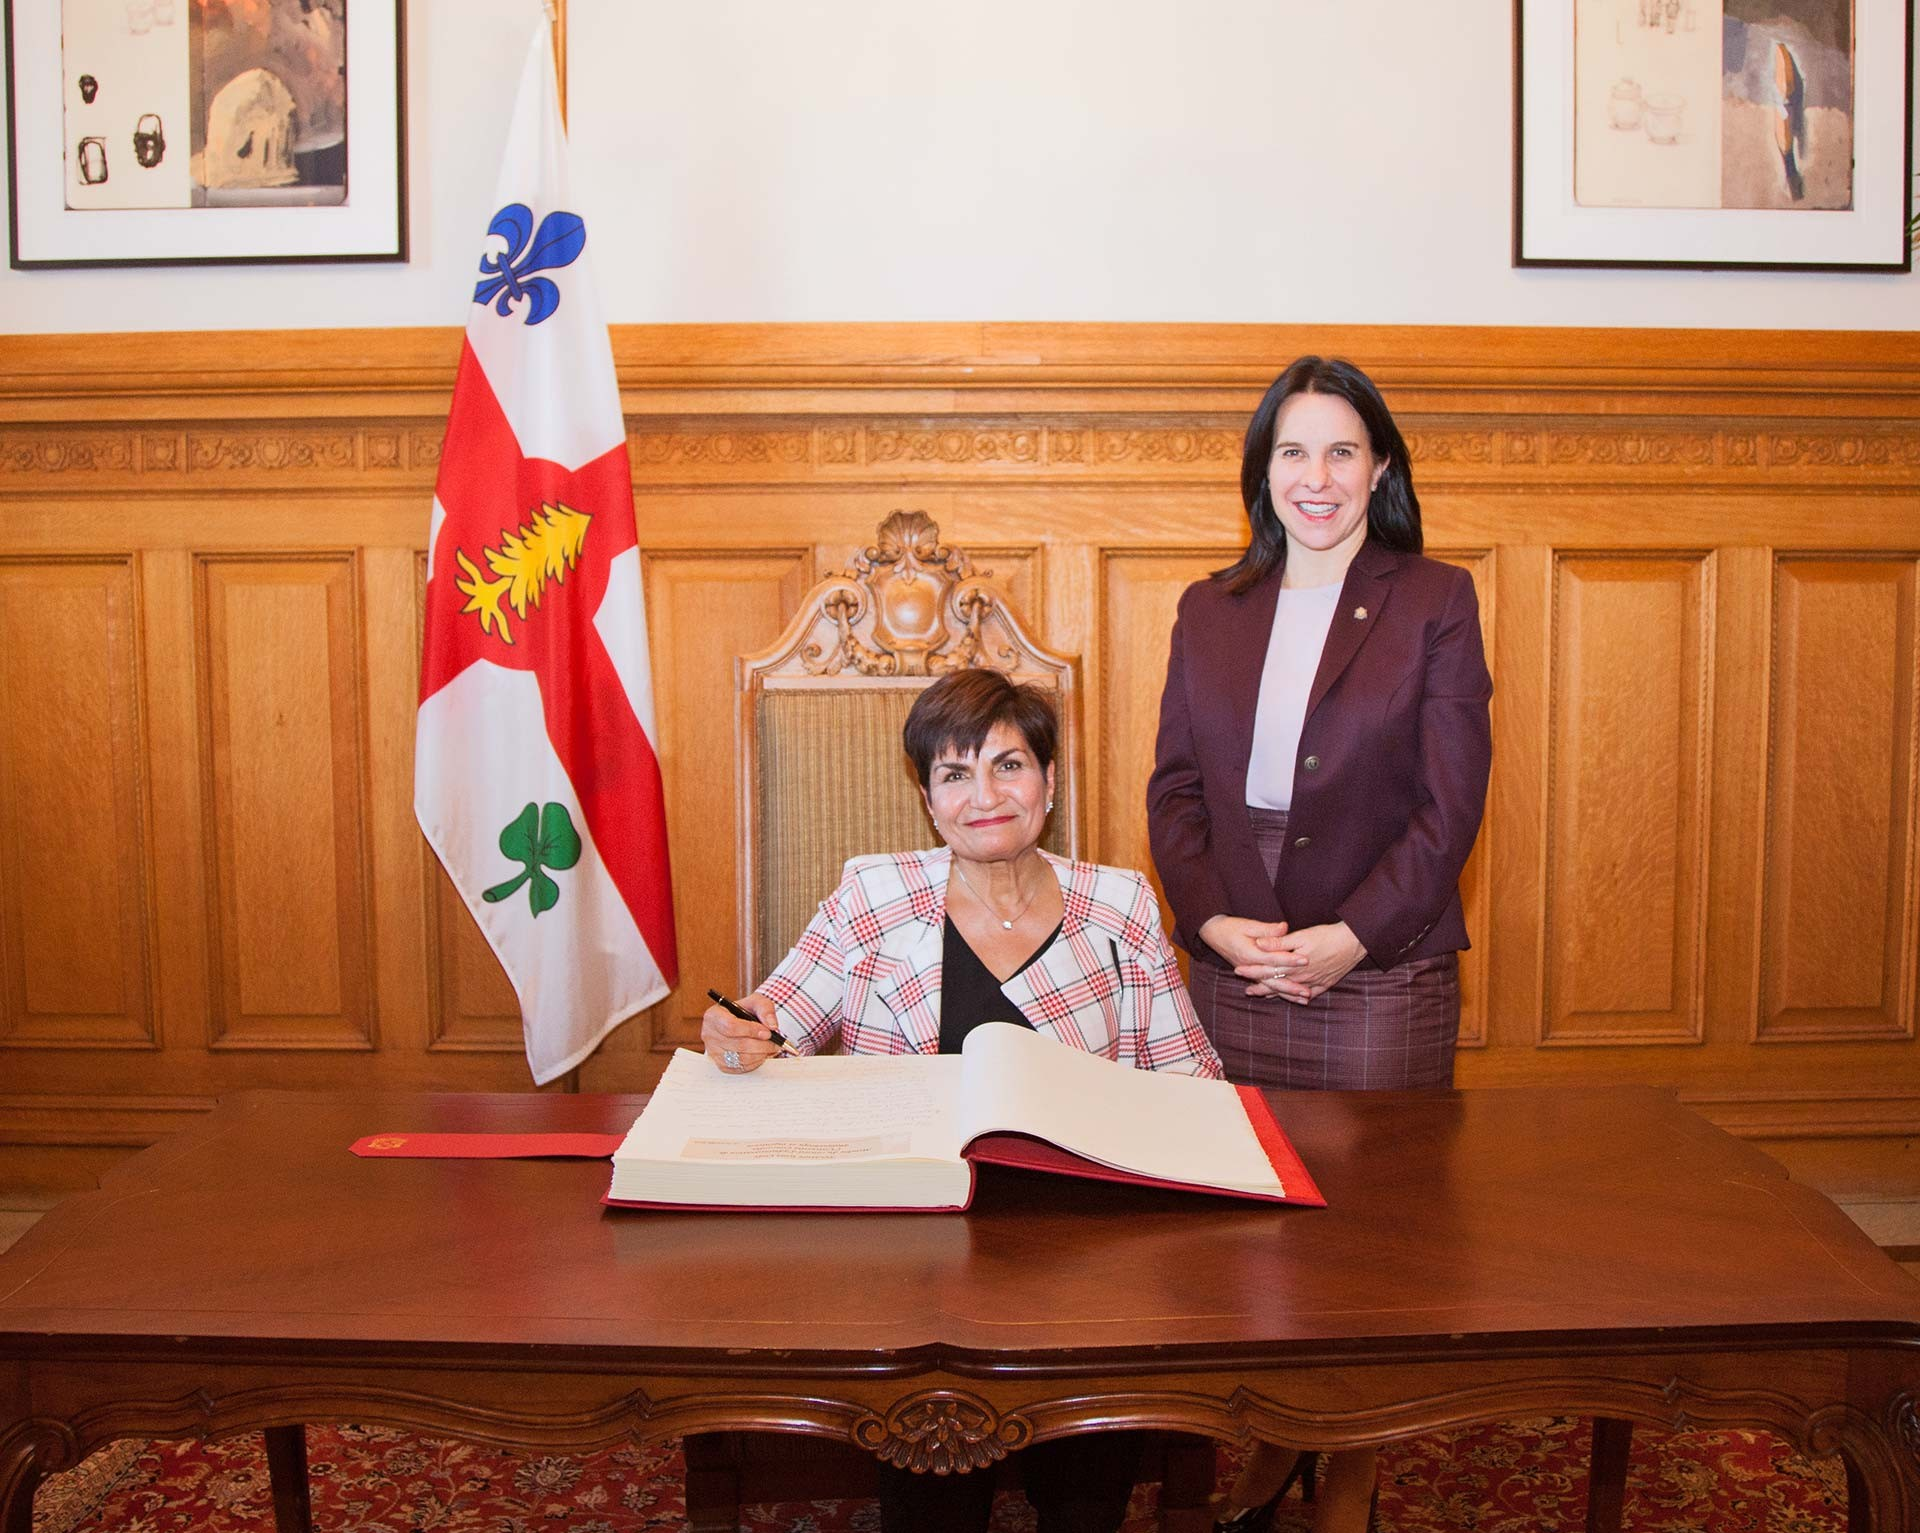 Alumna Gina Cody visits city hall to sign Montreal’s Livre d’or